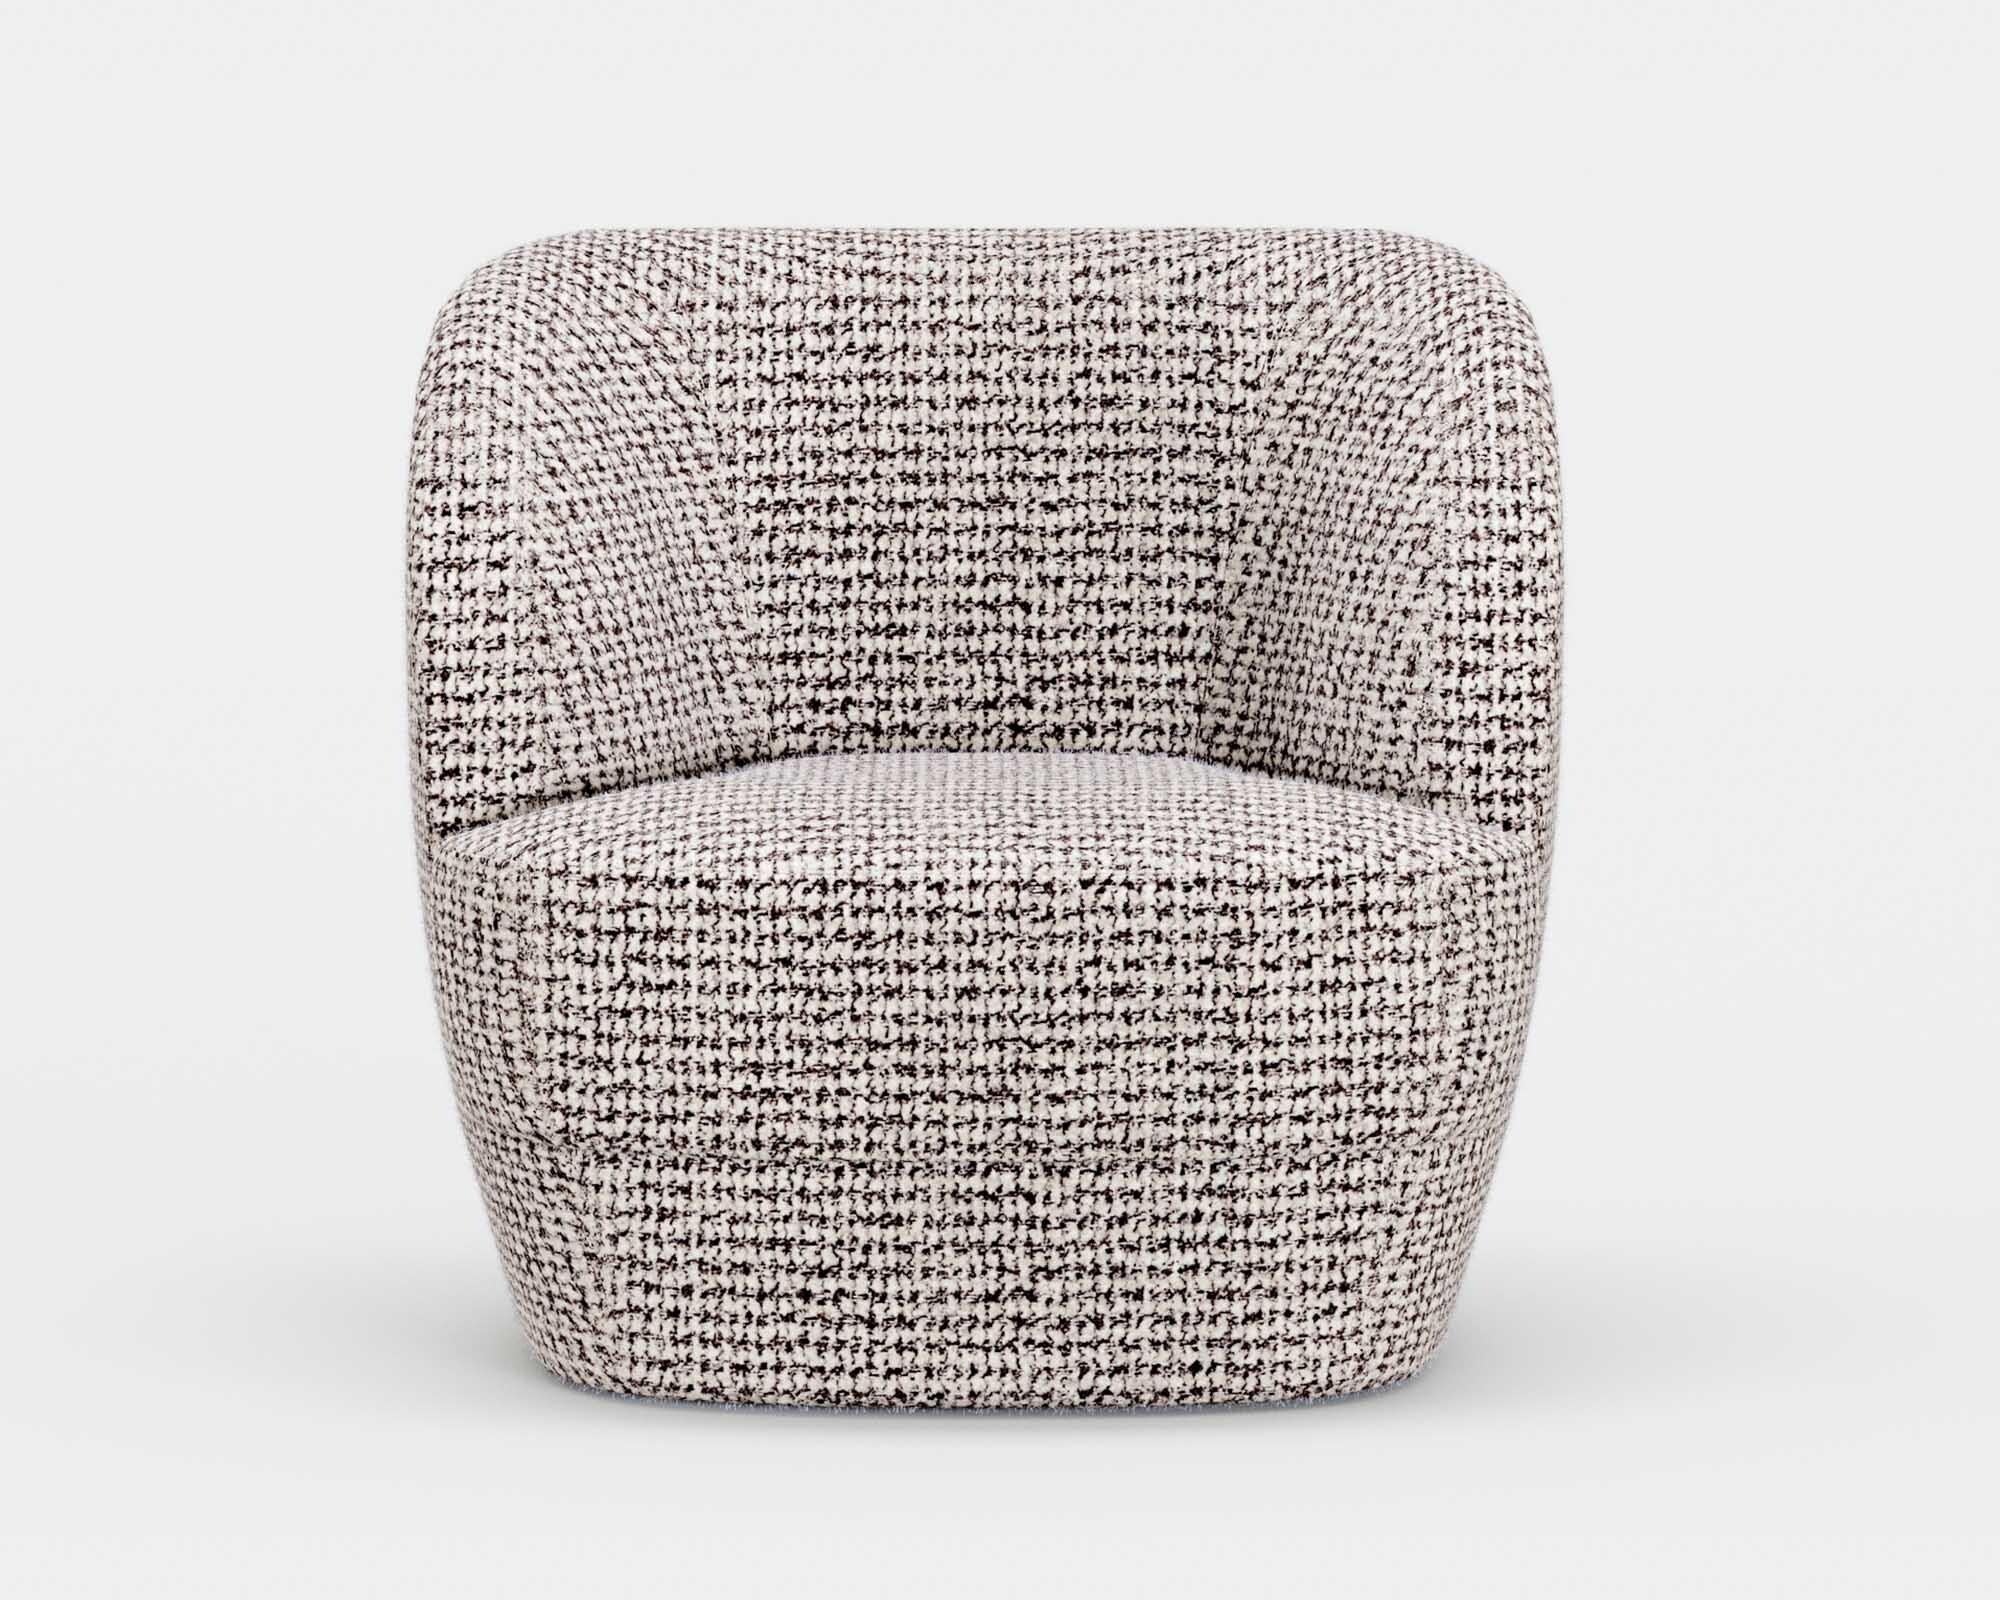 'Lombard Street' Armchair by Man of Parts
Signed by Yabu Pushelberg

Dimensions:
- H. 77 x W. 76 x D. 79 cm  / Seat 41 cm 

Model shown: Sahco Coney 002

A wide range of fabrics is available 

__________________

The Lombard Street armchair was